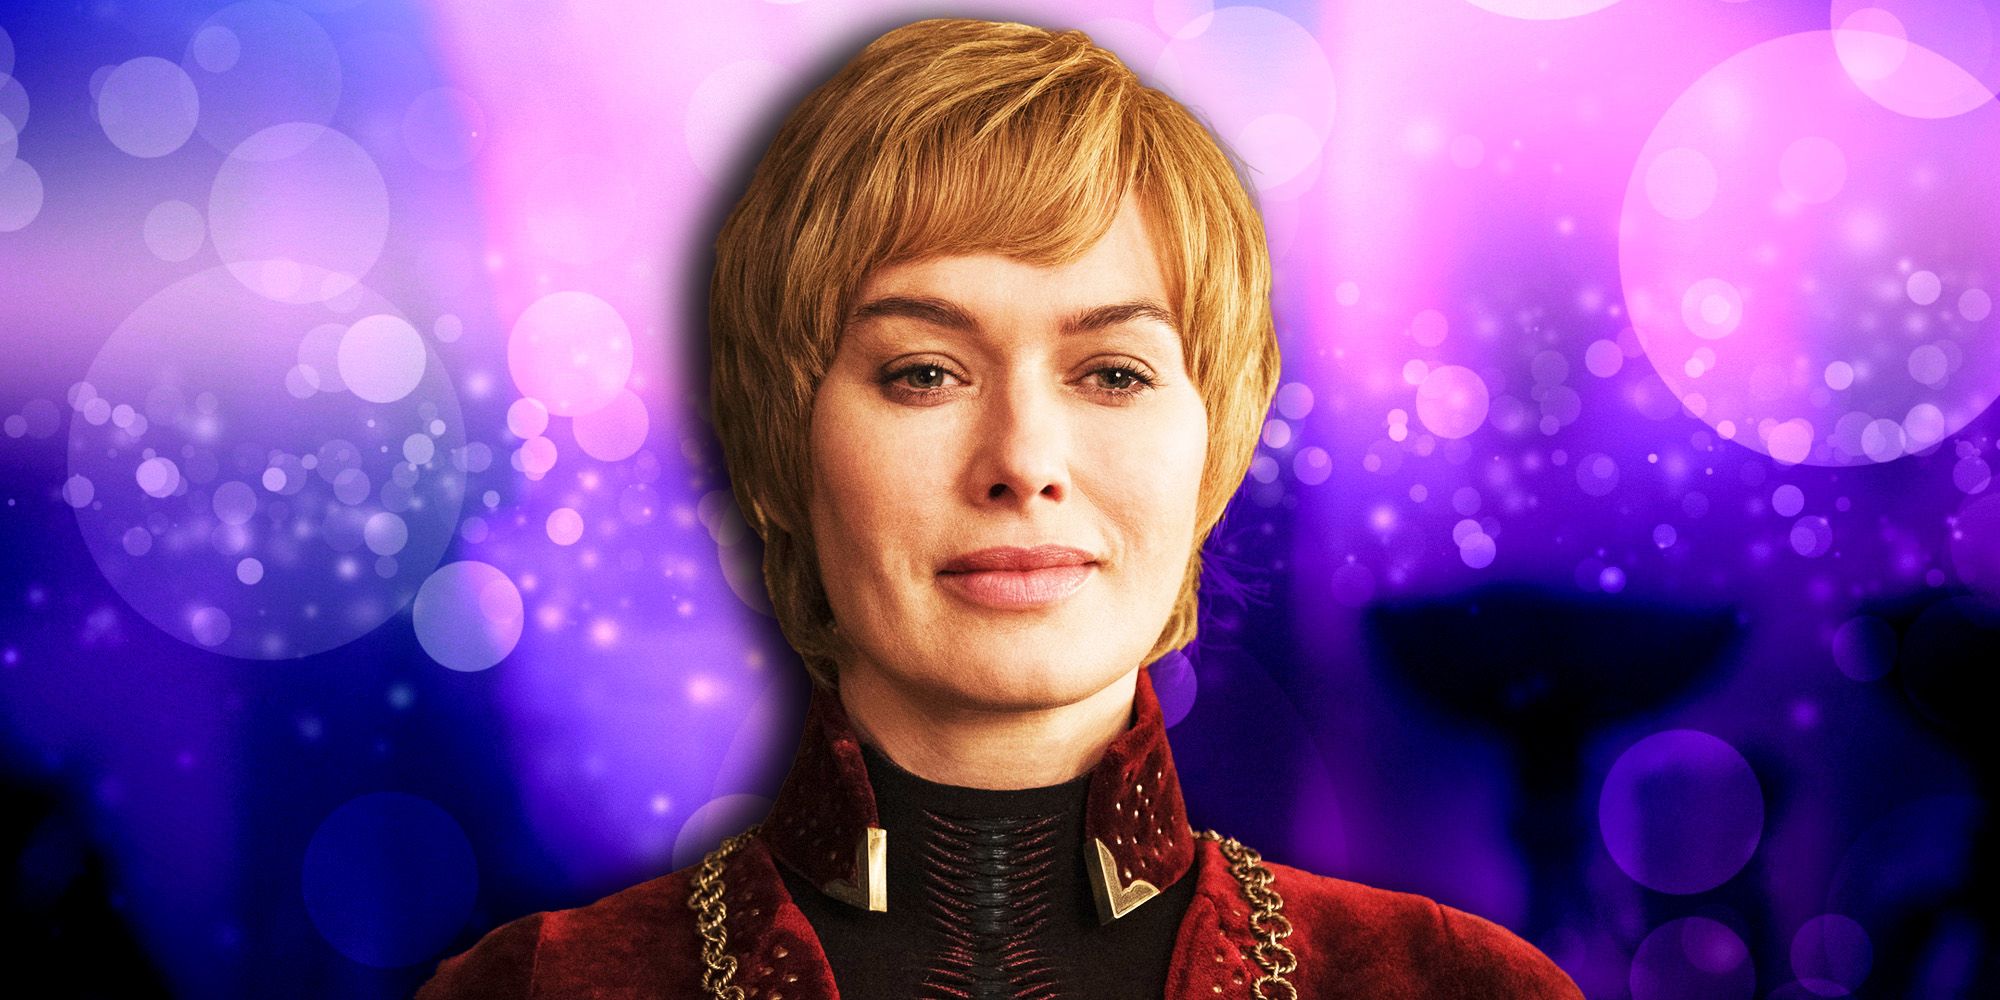 lena-headey-beacon-23-character-aster-cersei-lannister-perfect